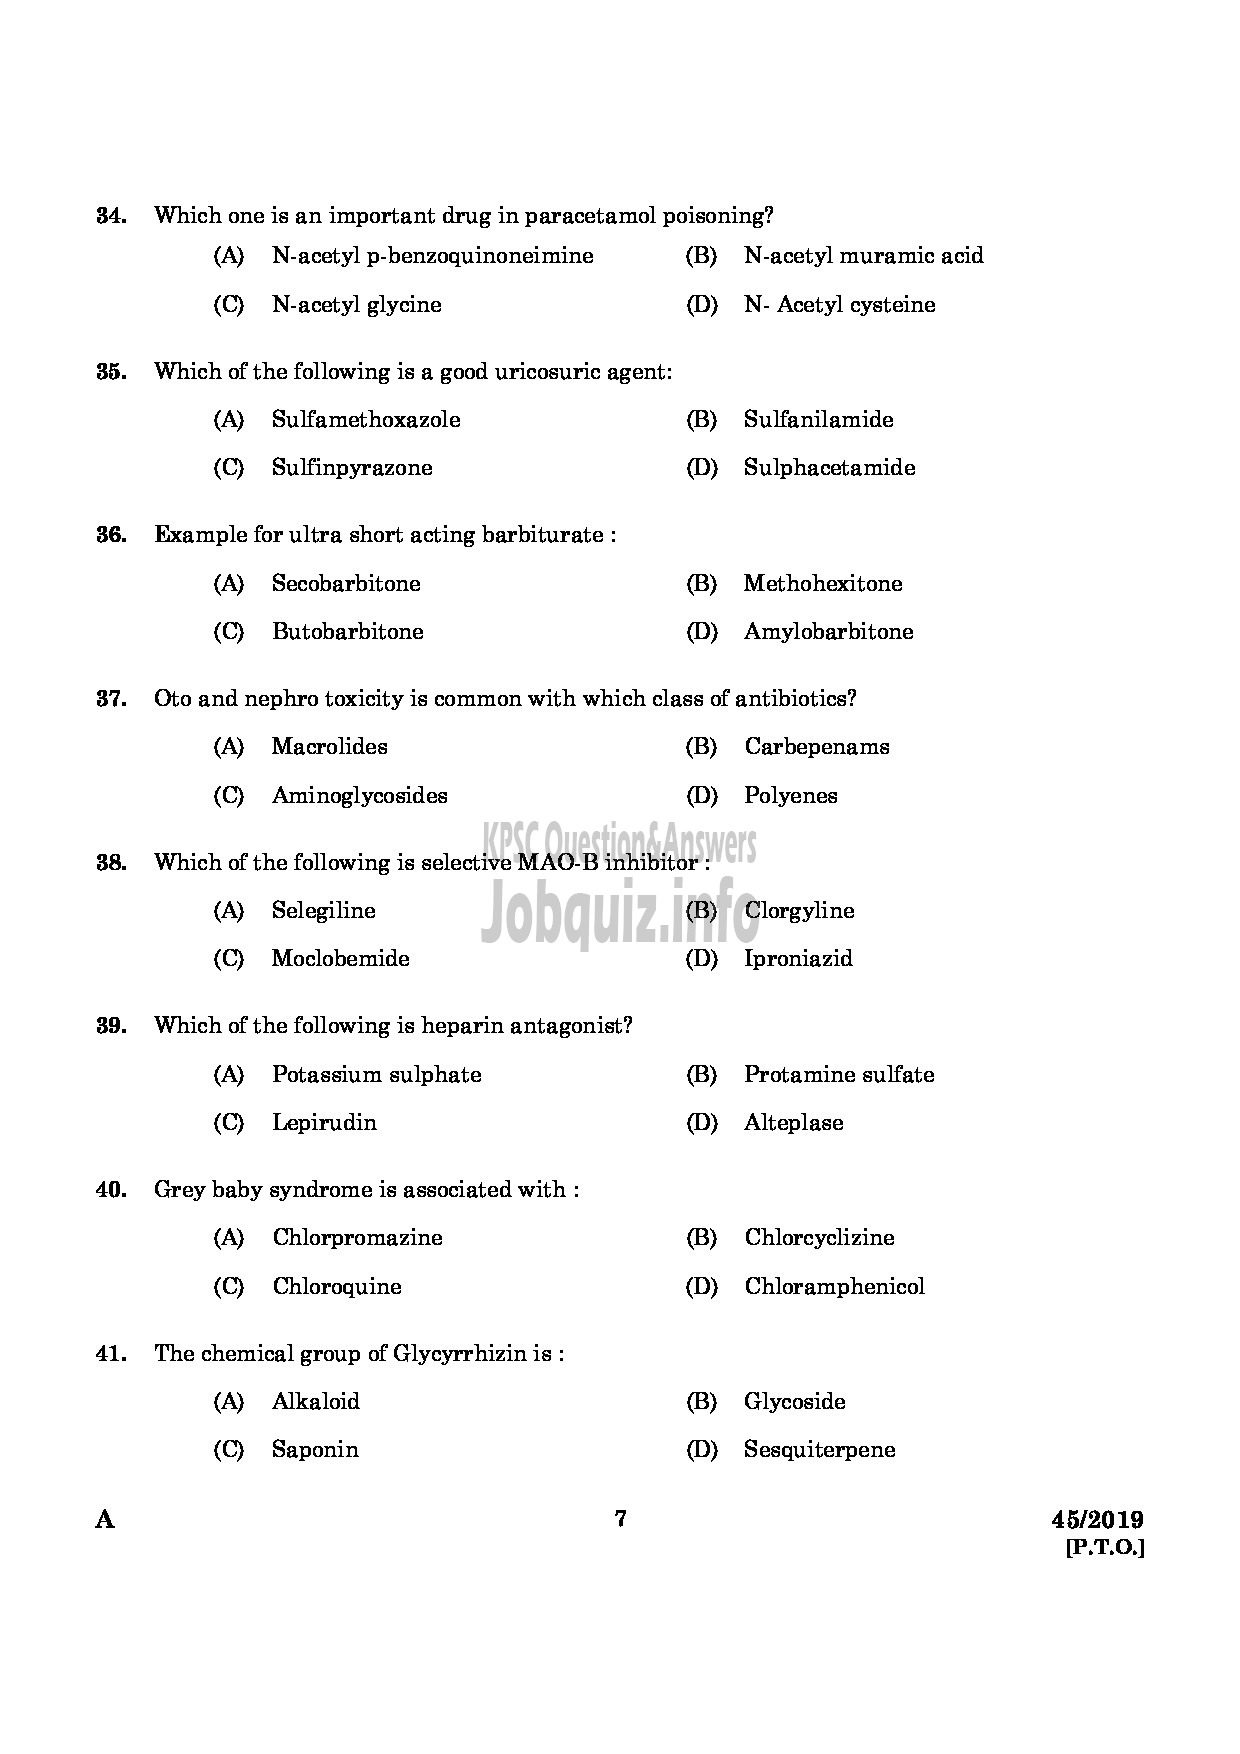 Kerala PSC Question Paper - Pharmacist Gr II Health Services/IMS English -5